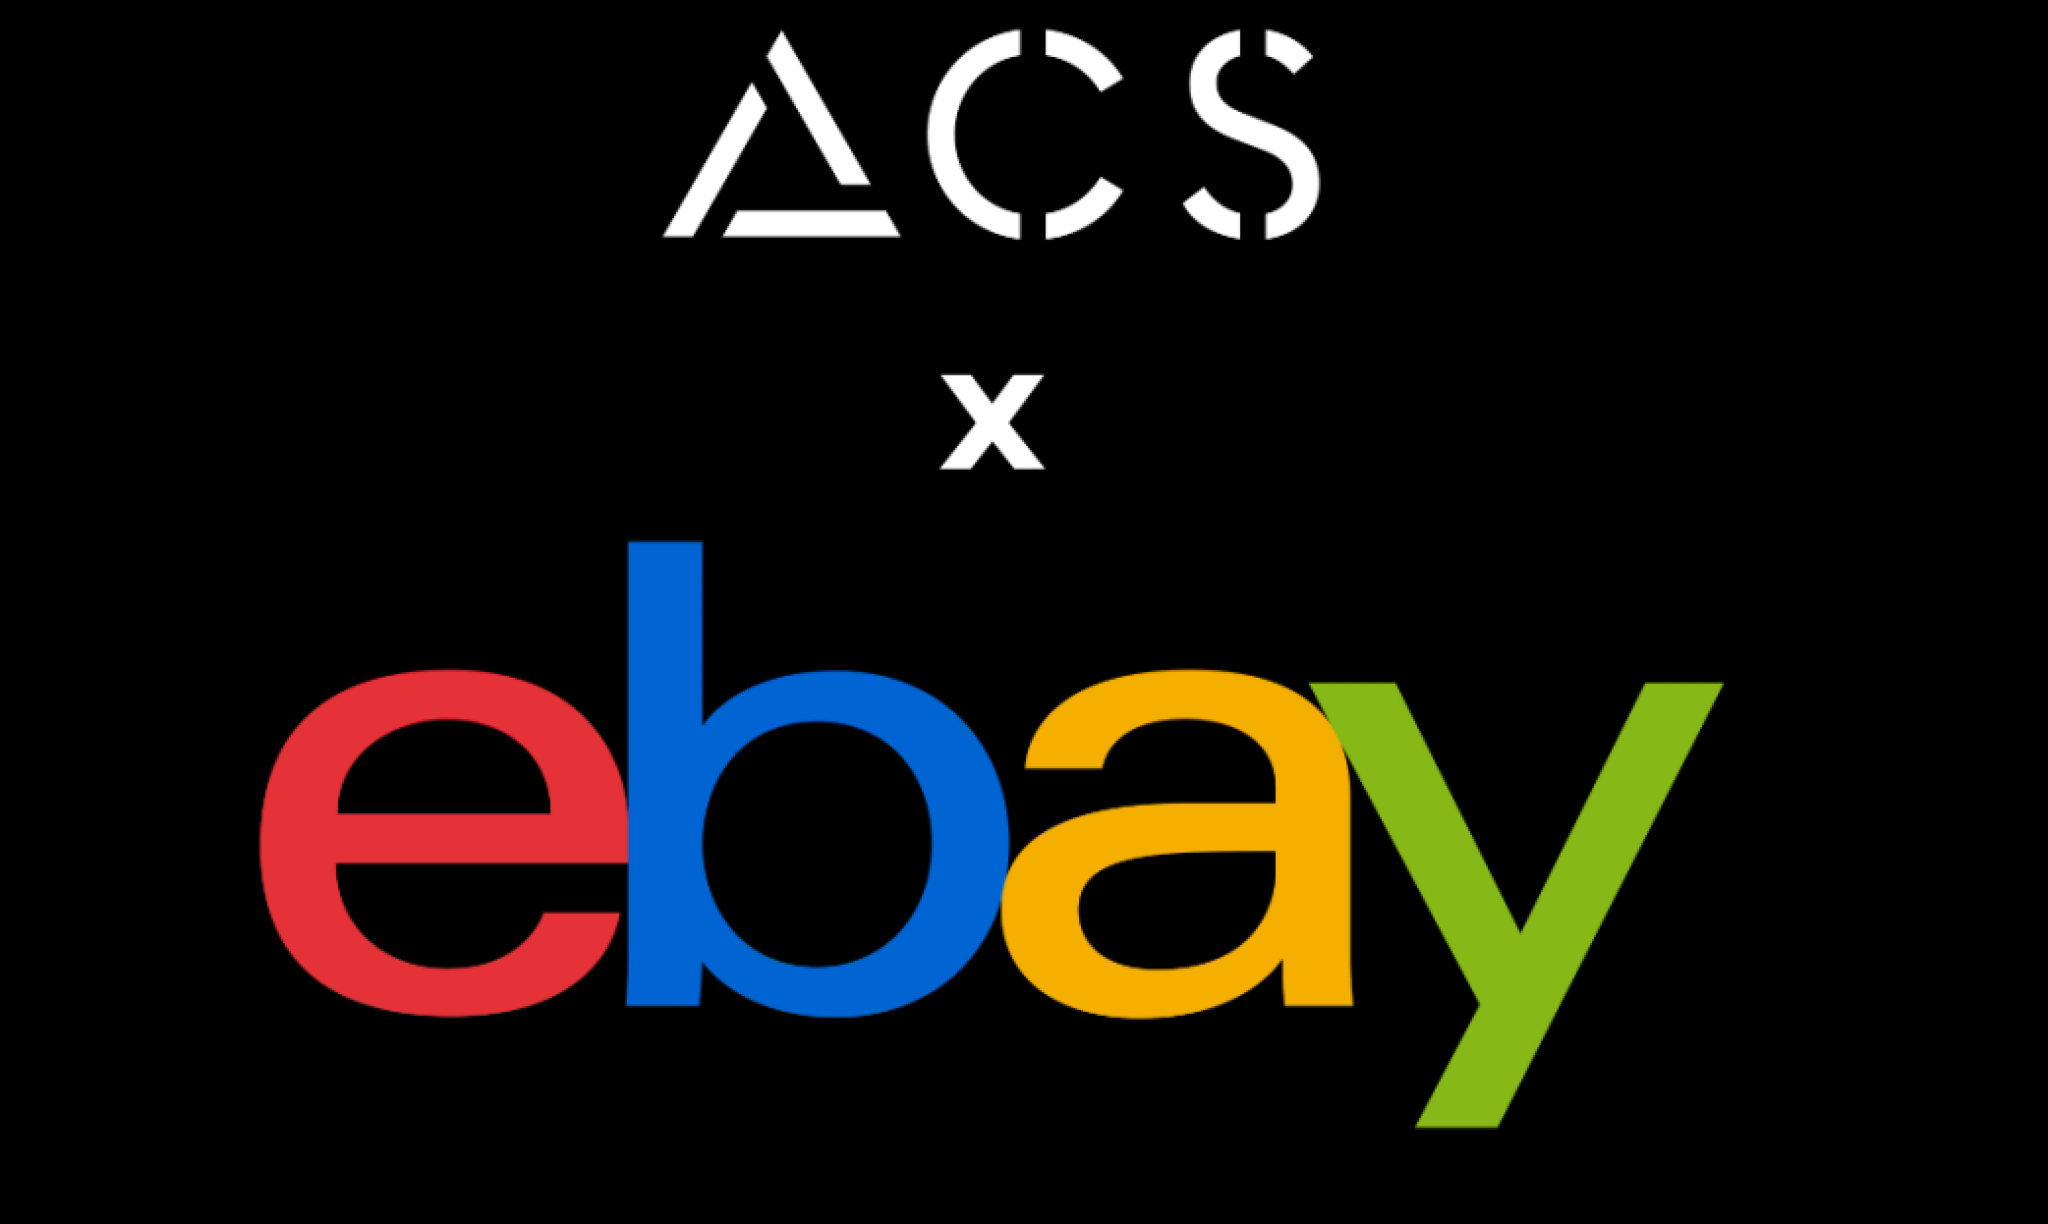 ACS and eBay in resale partnership